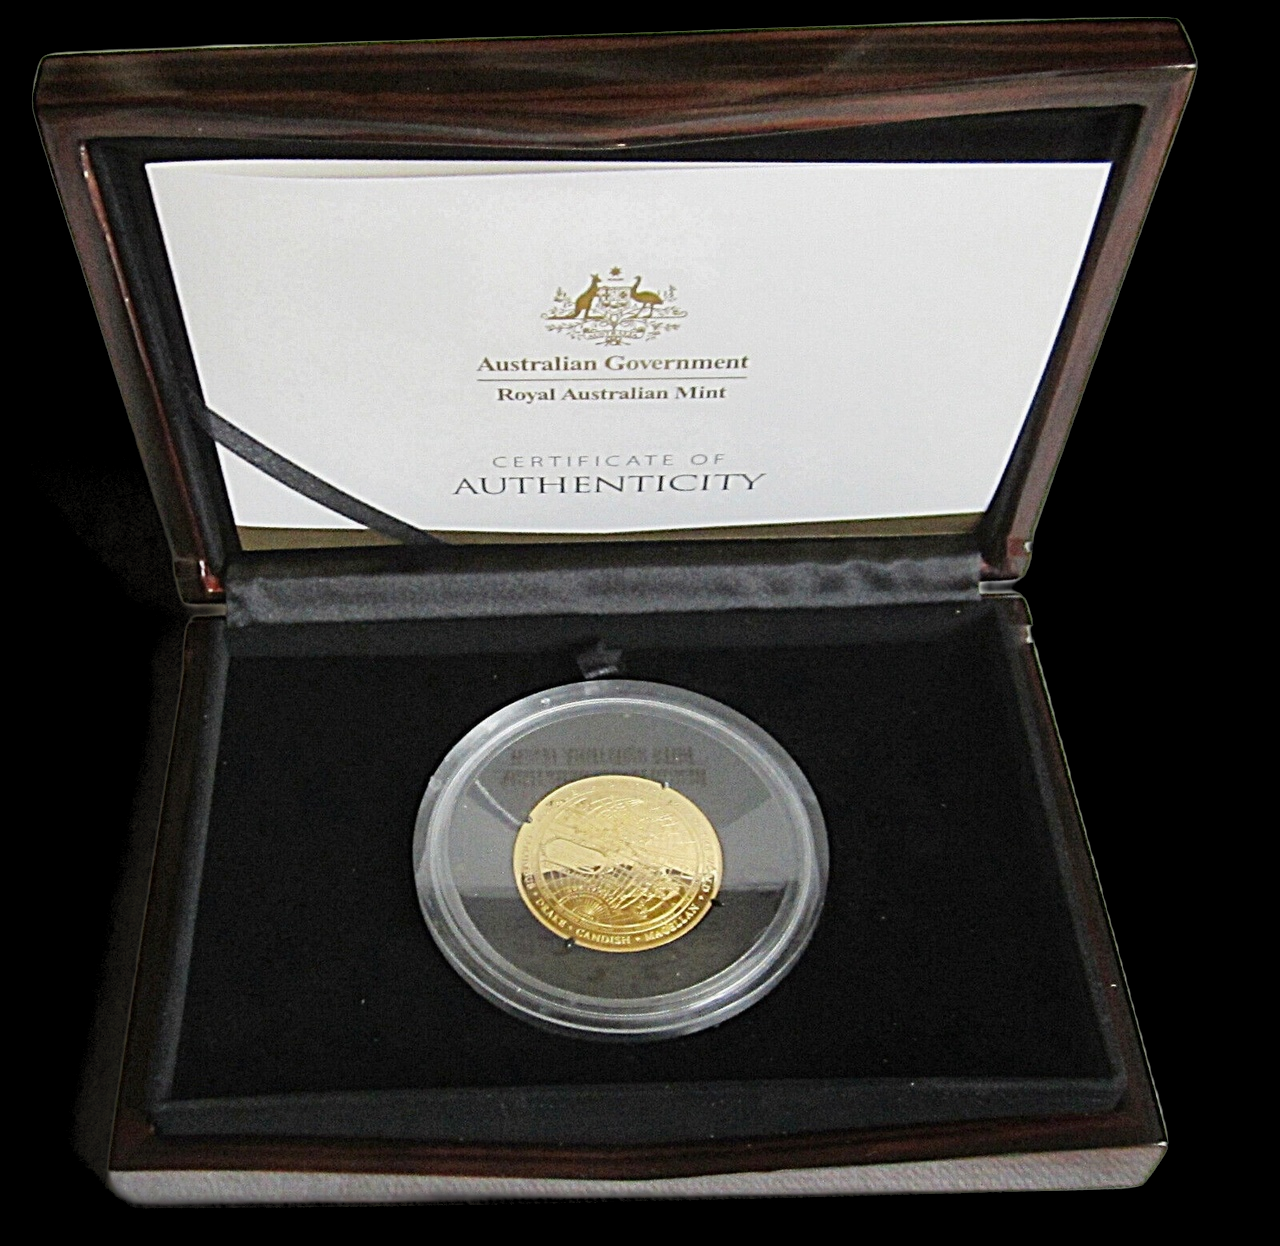 A NEW MAP OF THE WORLD 1626, Serie Terrestrial Gold, 1 oz Gold Proof Domed 100$, 2018